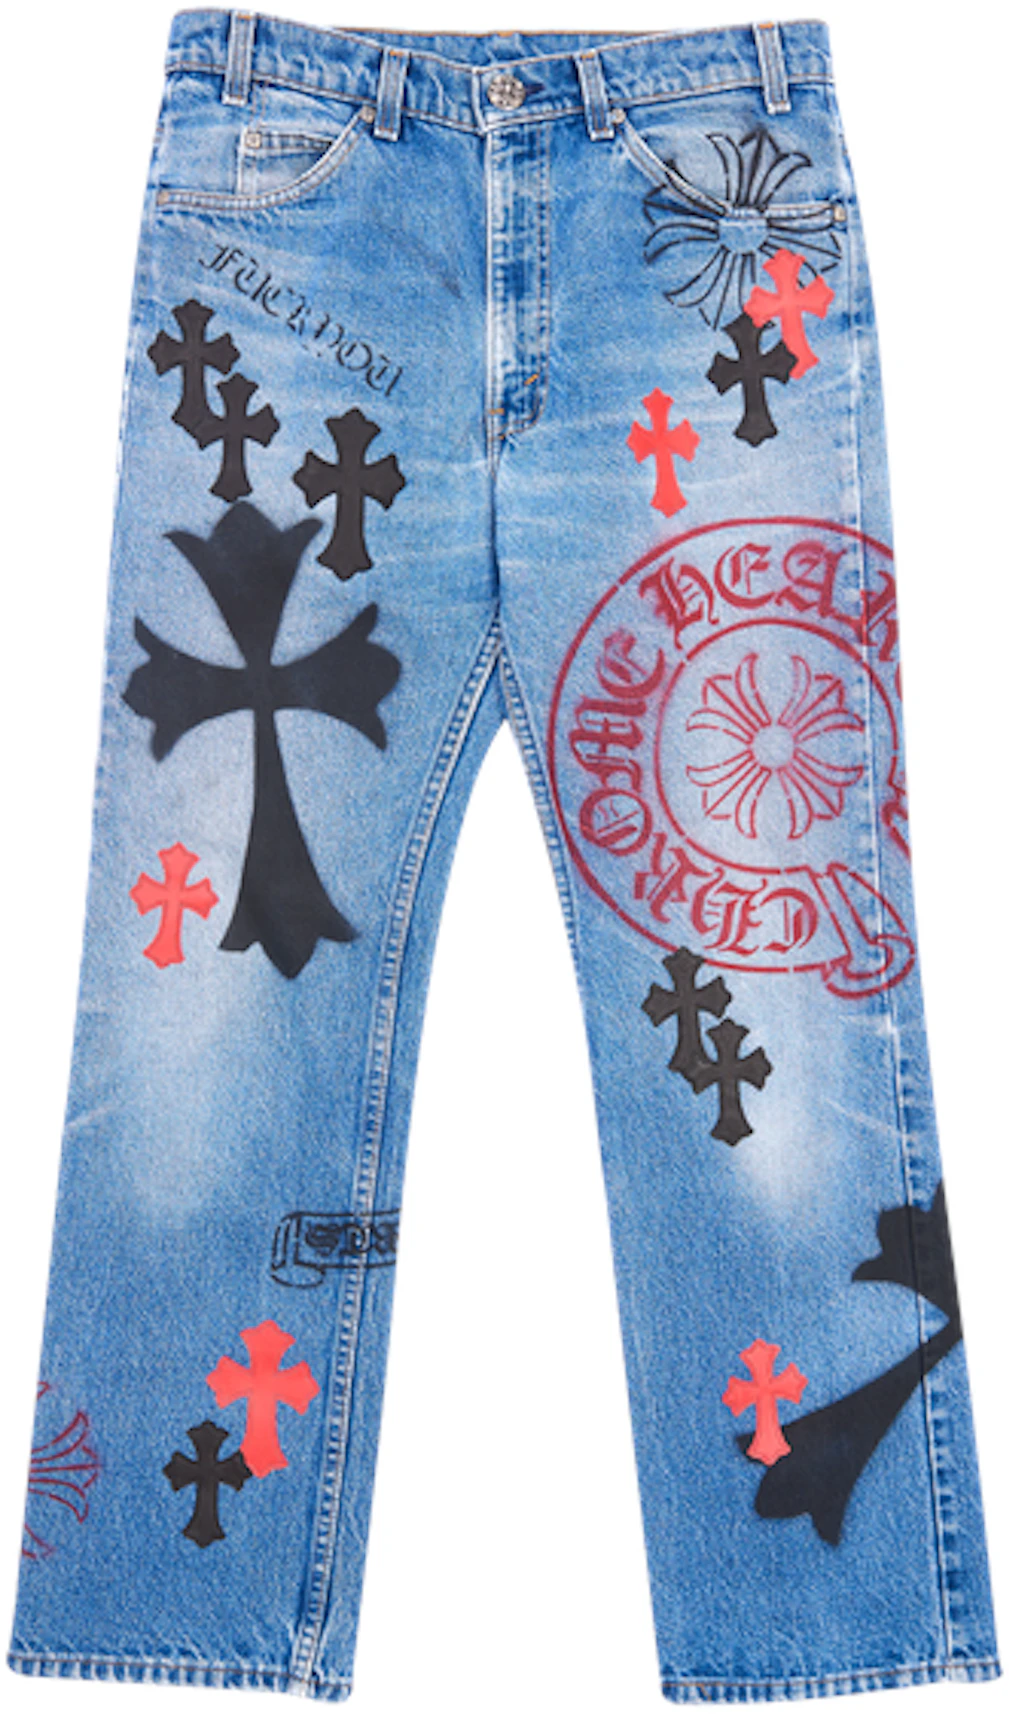 Chrome Hearts X Drake Certified Lover Boy Vintage Levi's Jeans Washed ...